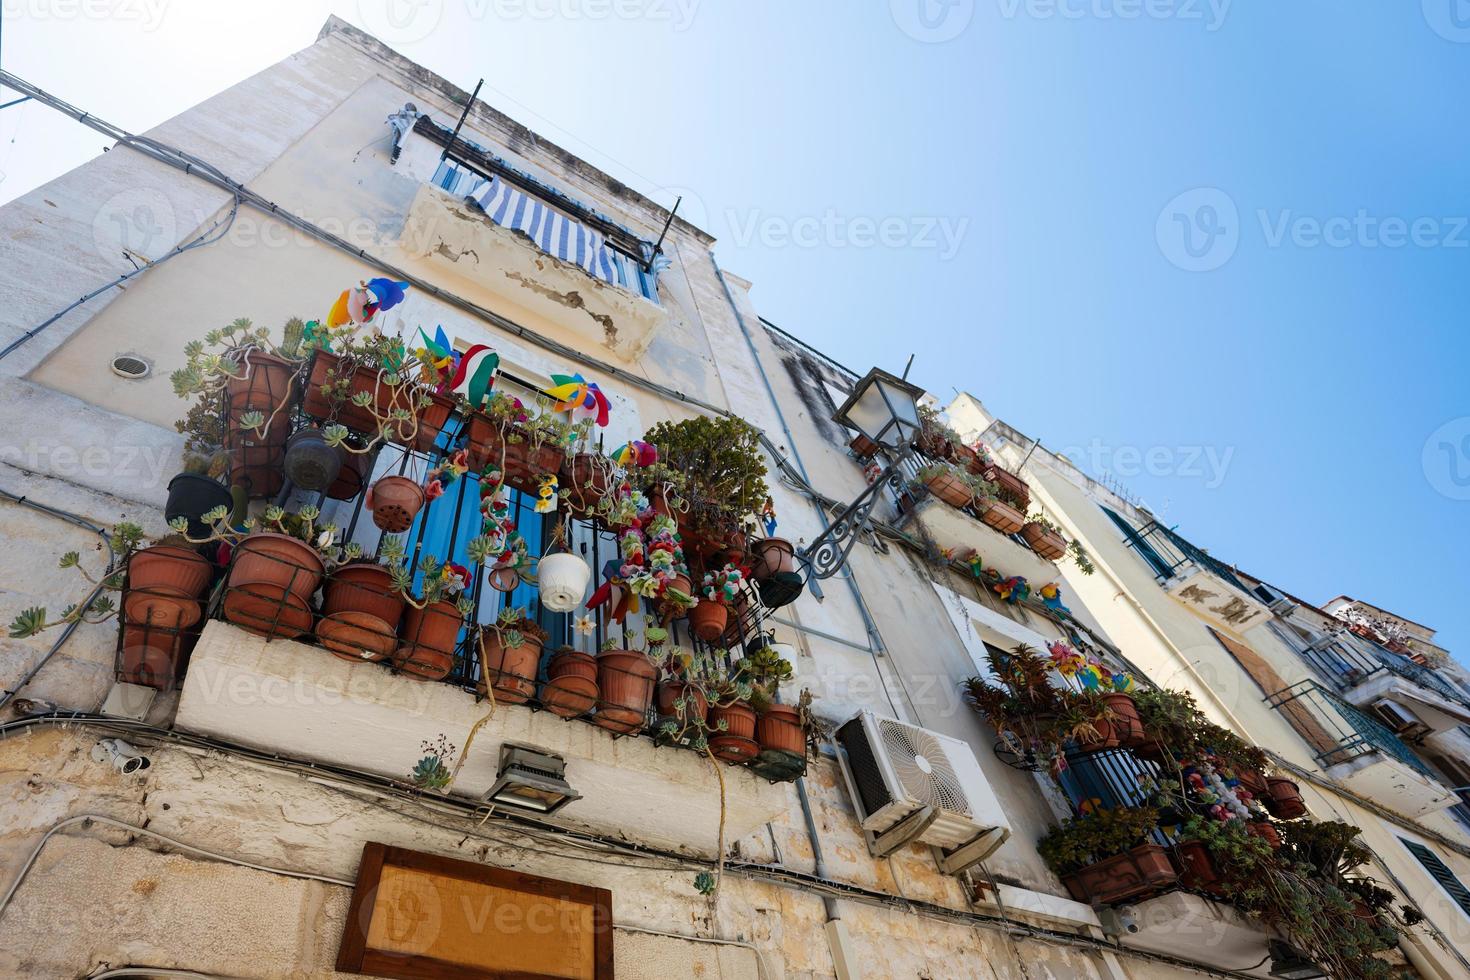 Balcony with flowers in pot of old city Bari, Puglia, South Italy. photo